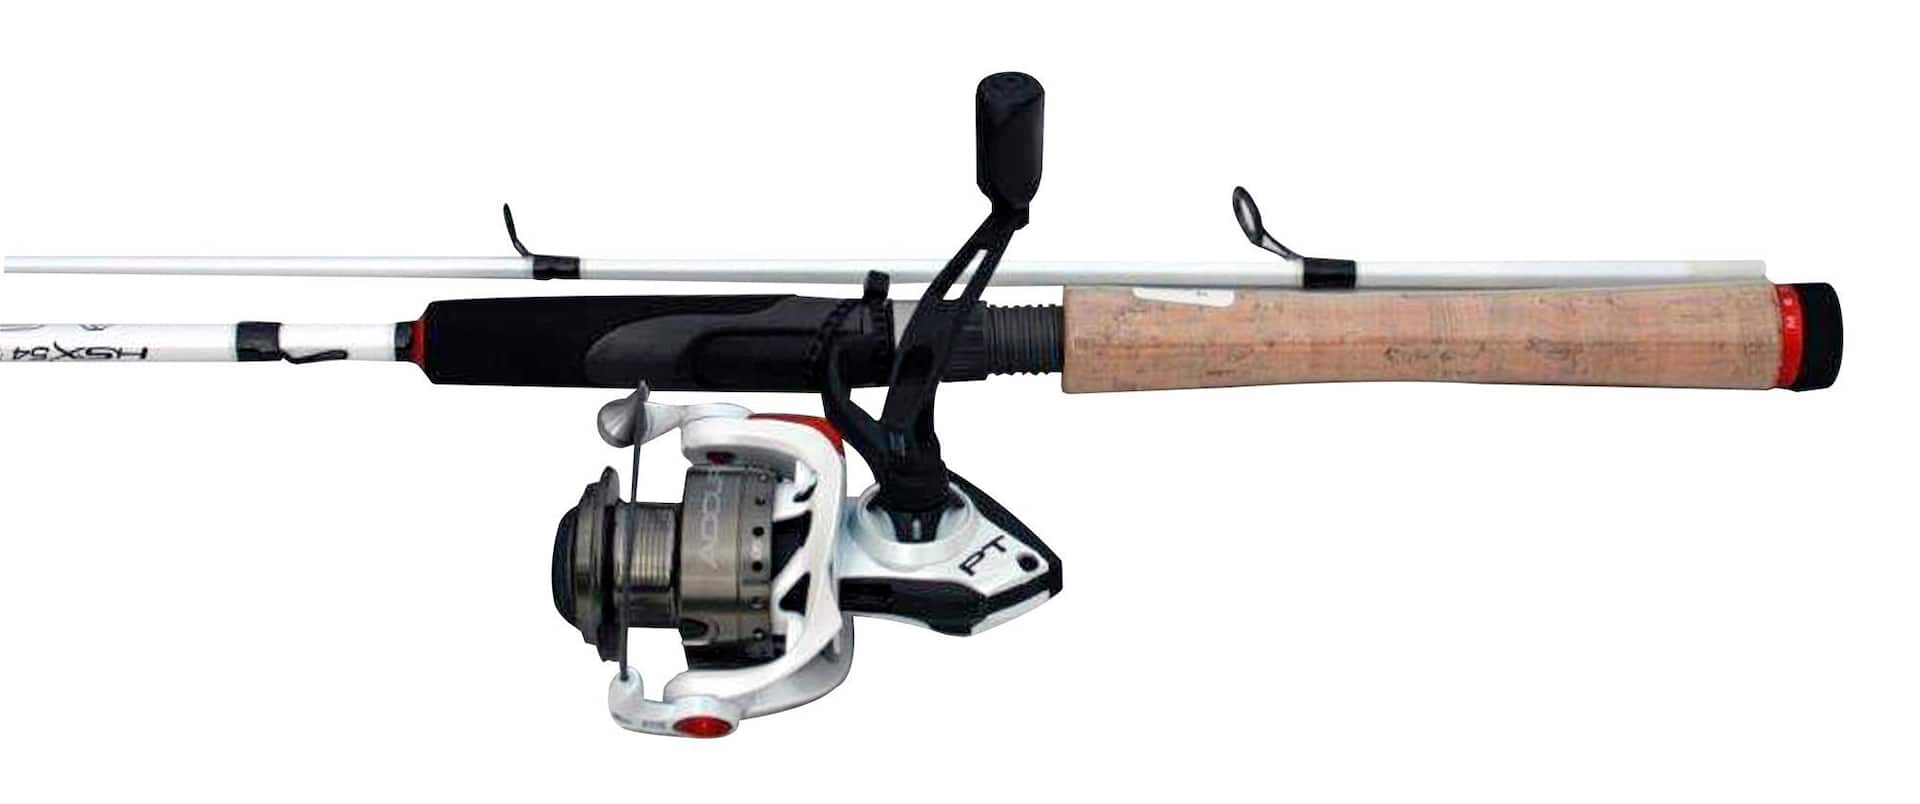 Quantum Traveller Spinning Fishing Rod and Reel Combo, Anti